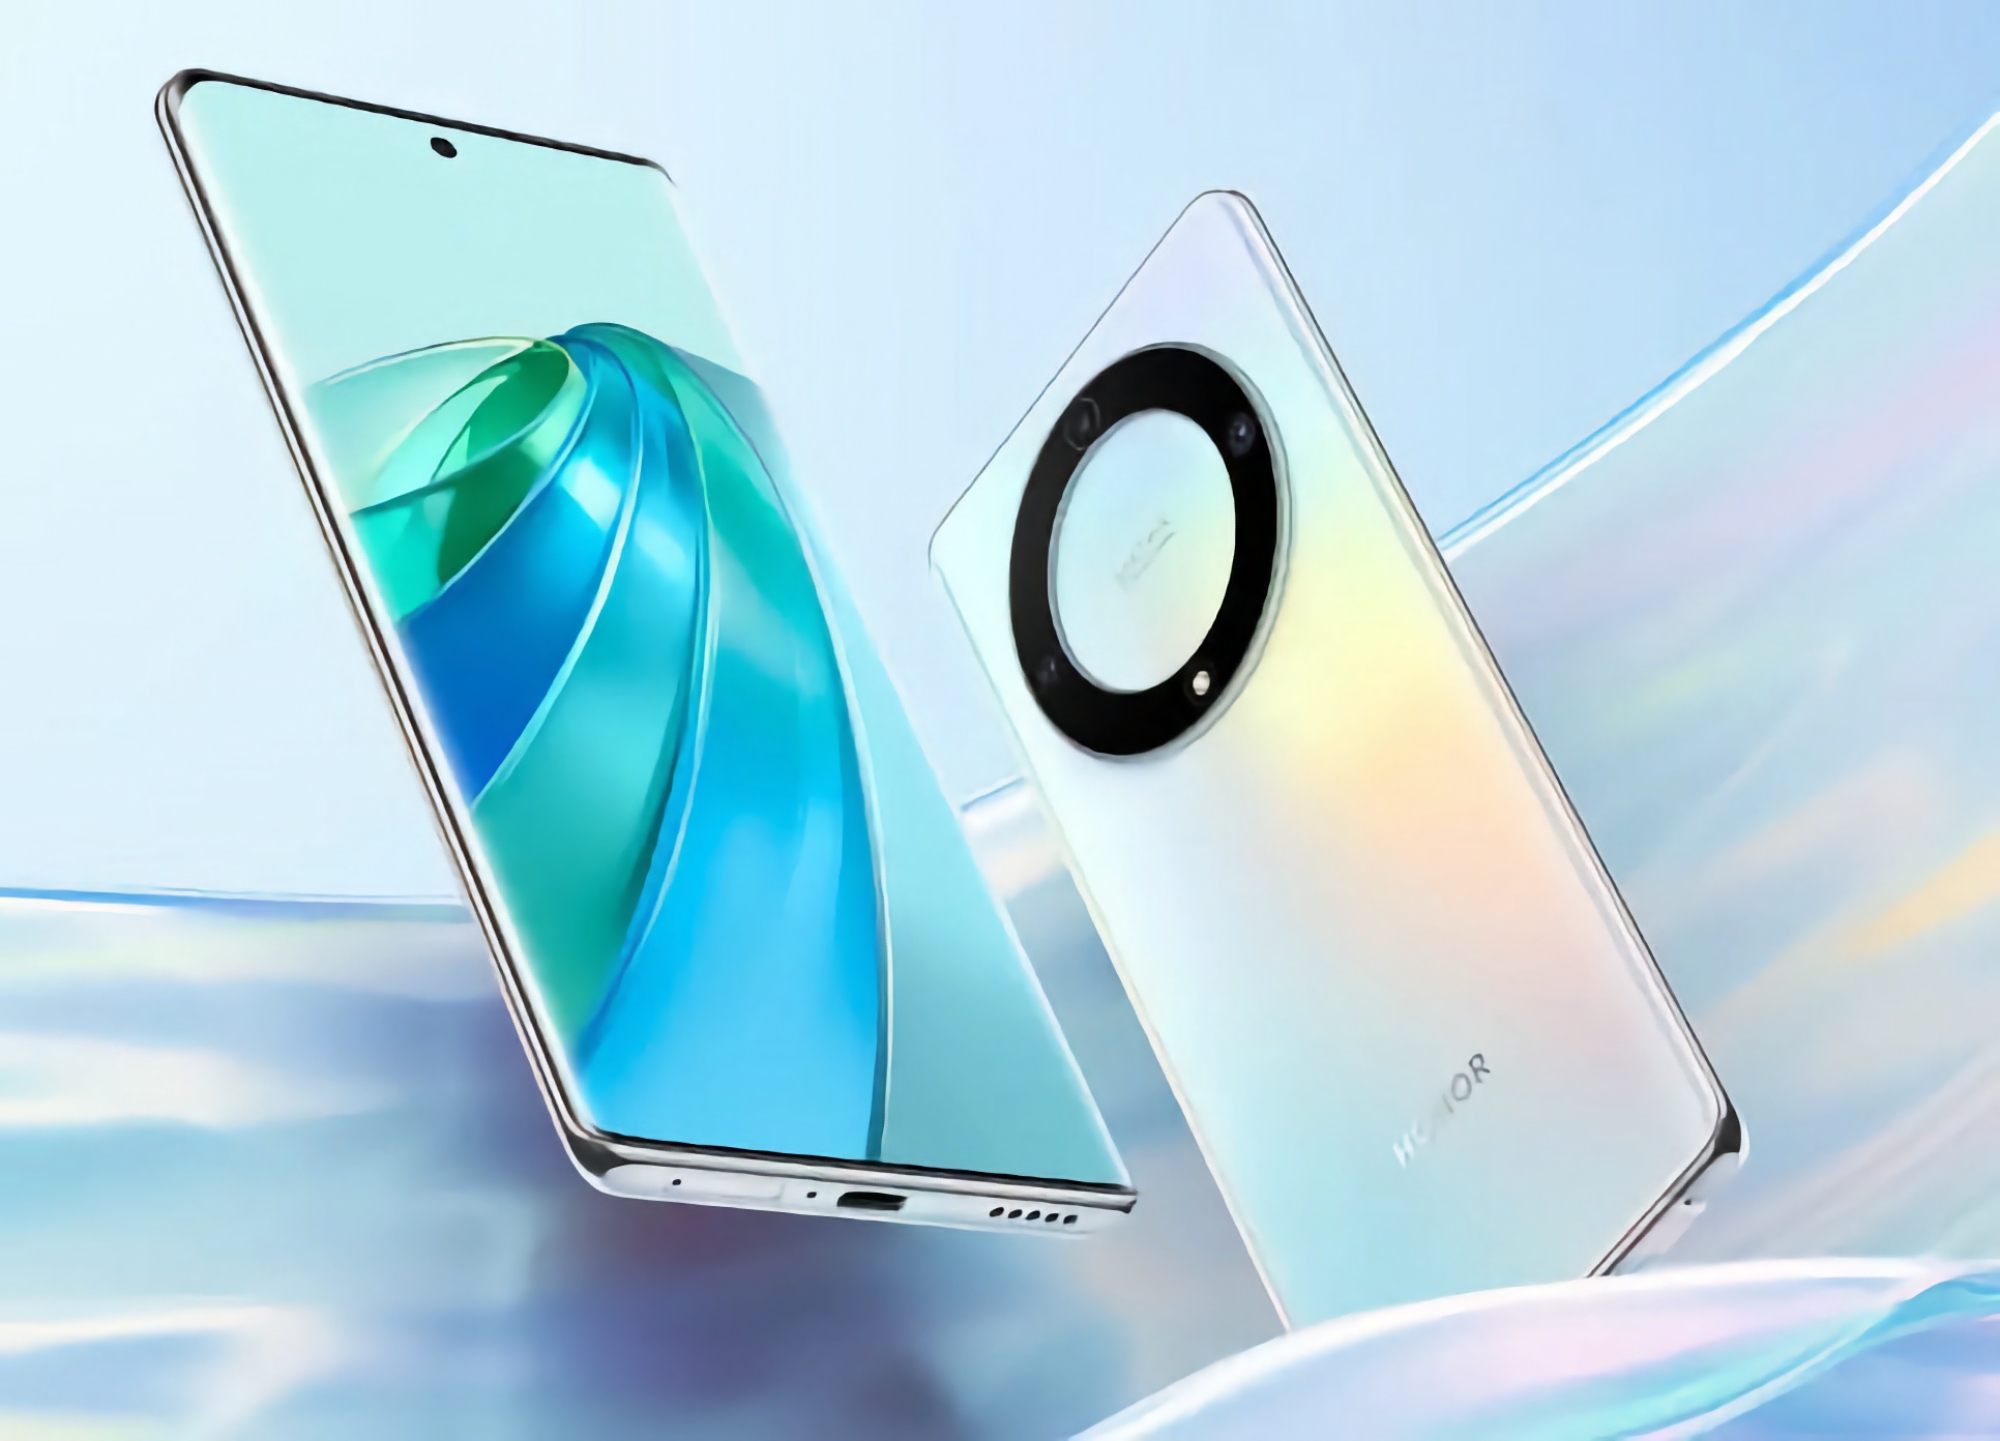 Honor X9a: AMOLED display at 120 Hz, Snapdragon 695 chip and triple 64 MP camera